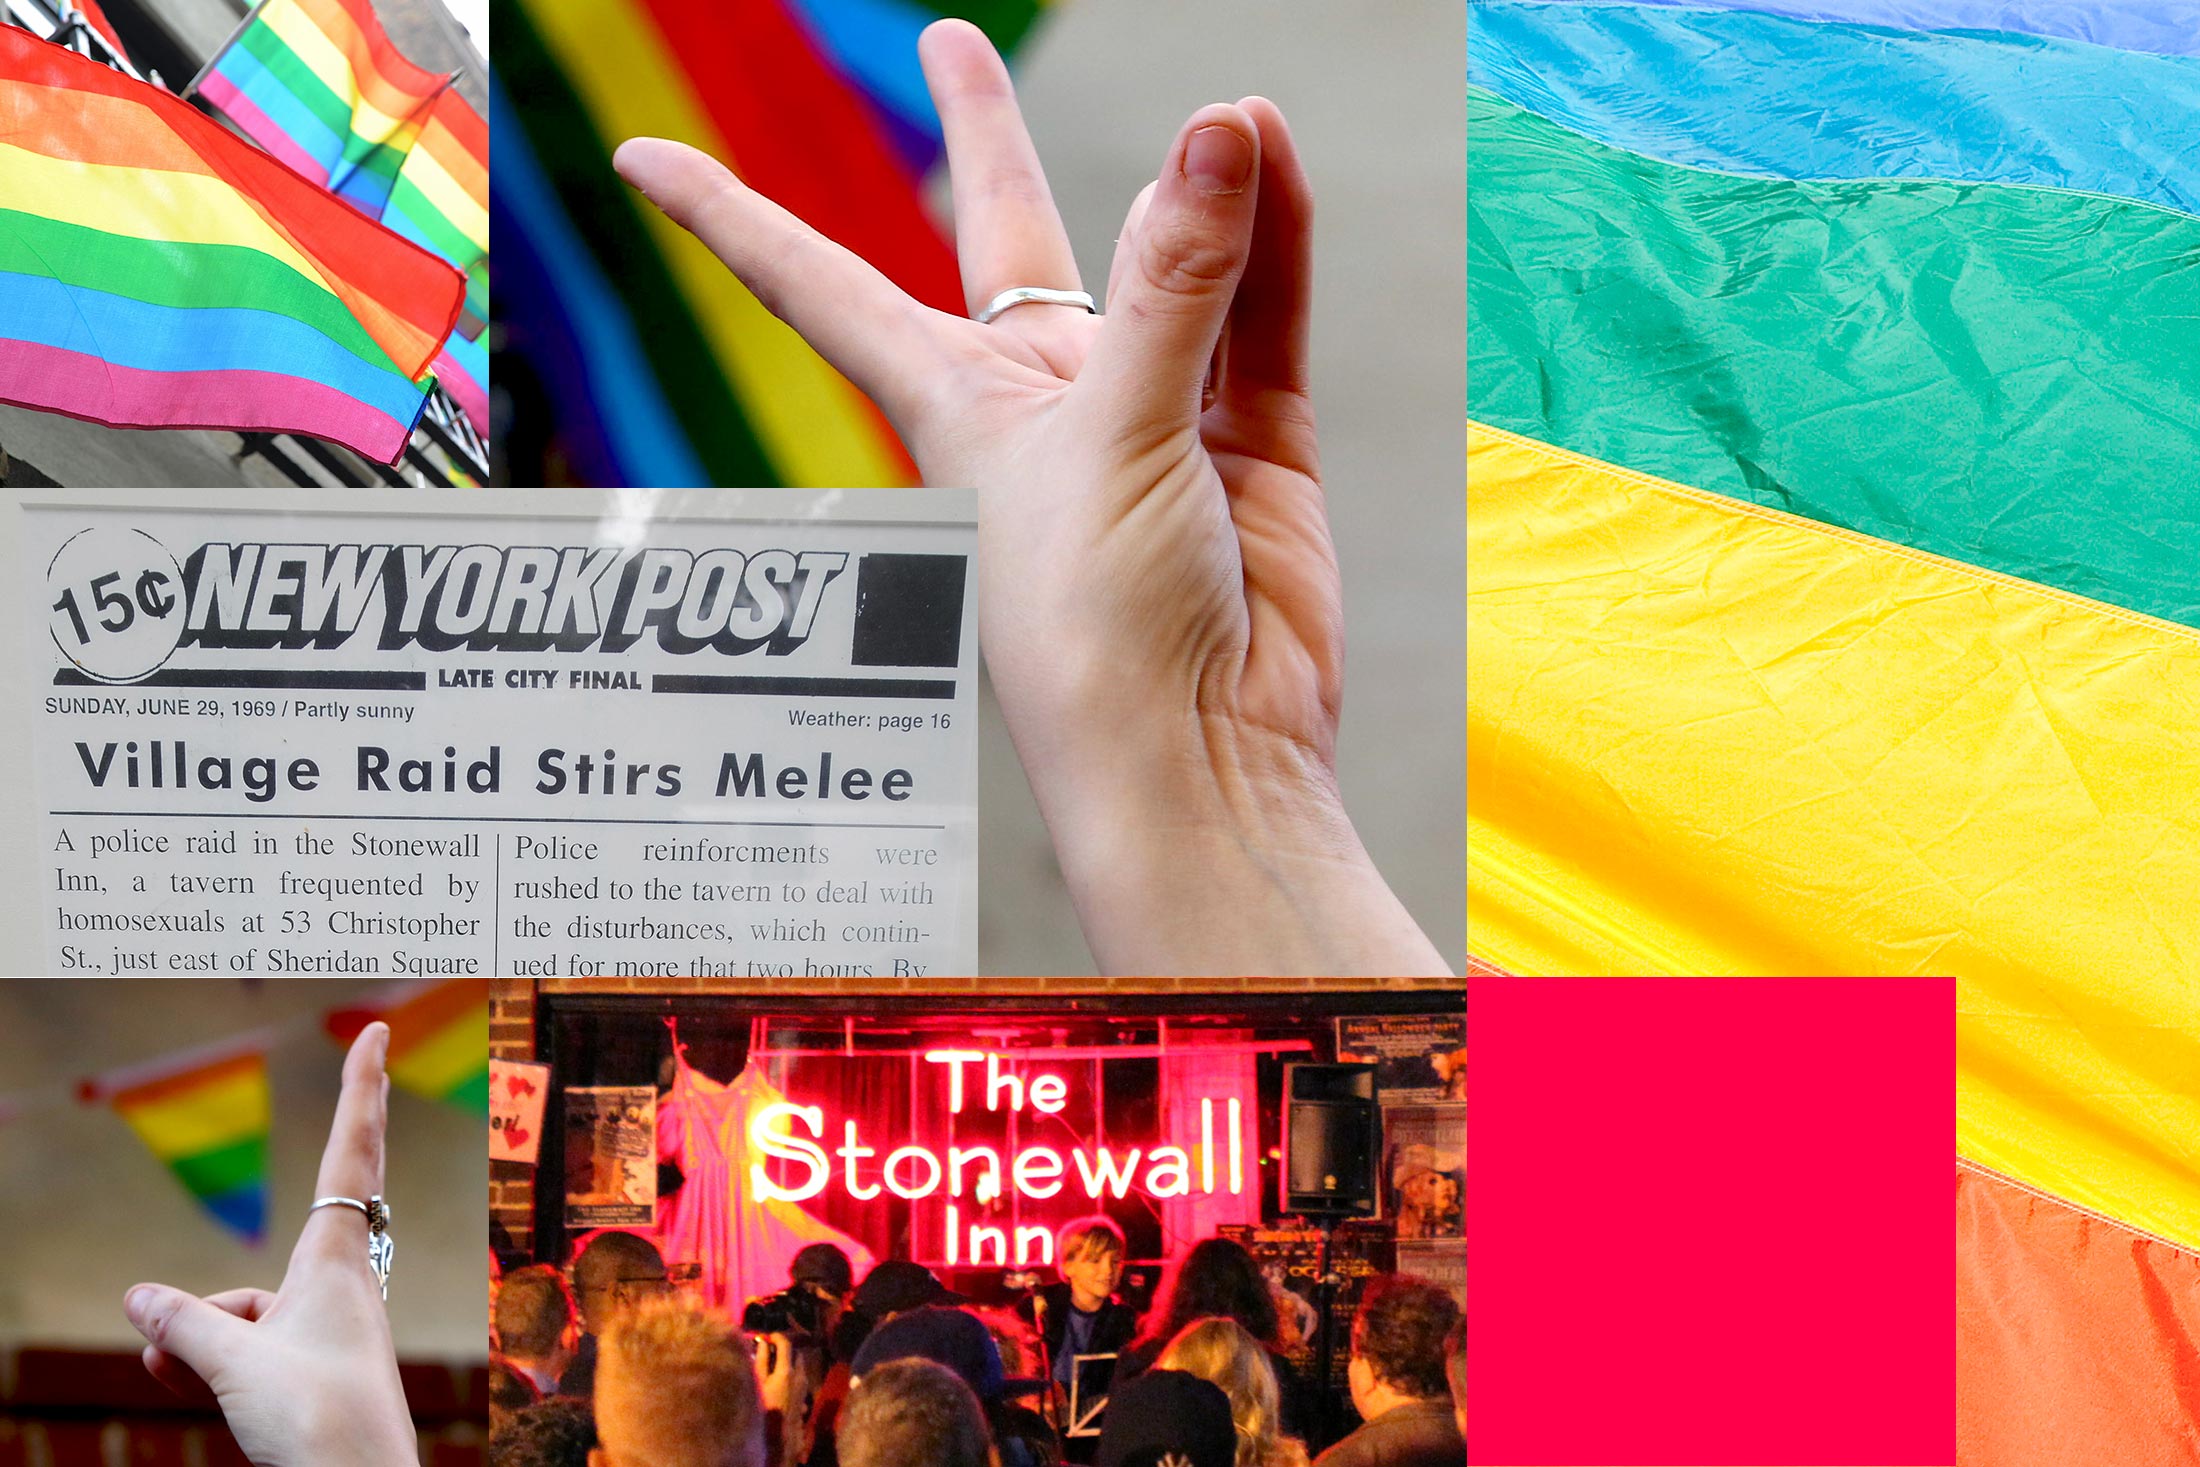 Grid of images through the years at Stonewall Inn, including rainbow flags and a photo of a tear sheet reporting on the 1969 riots.